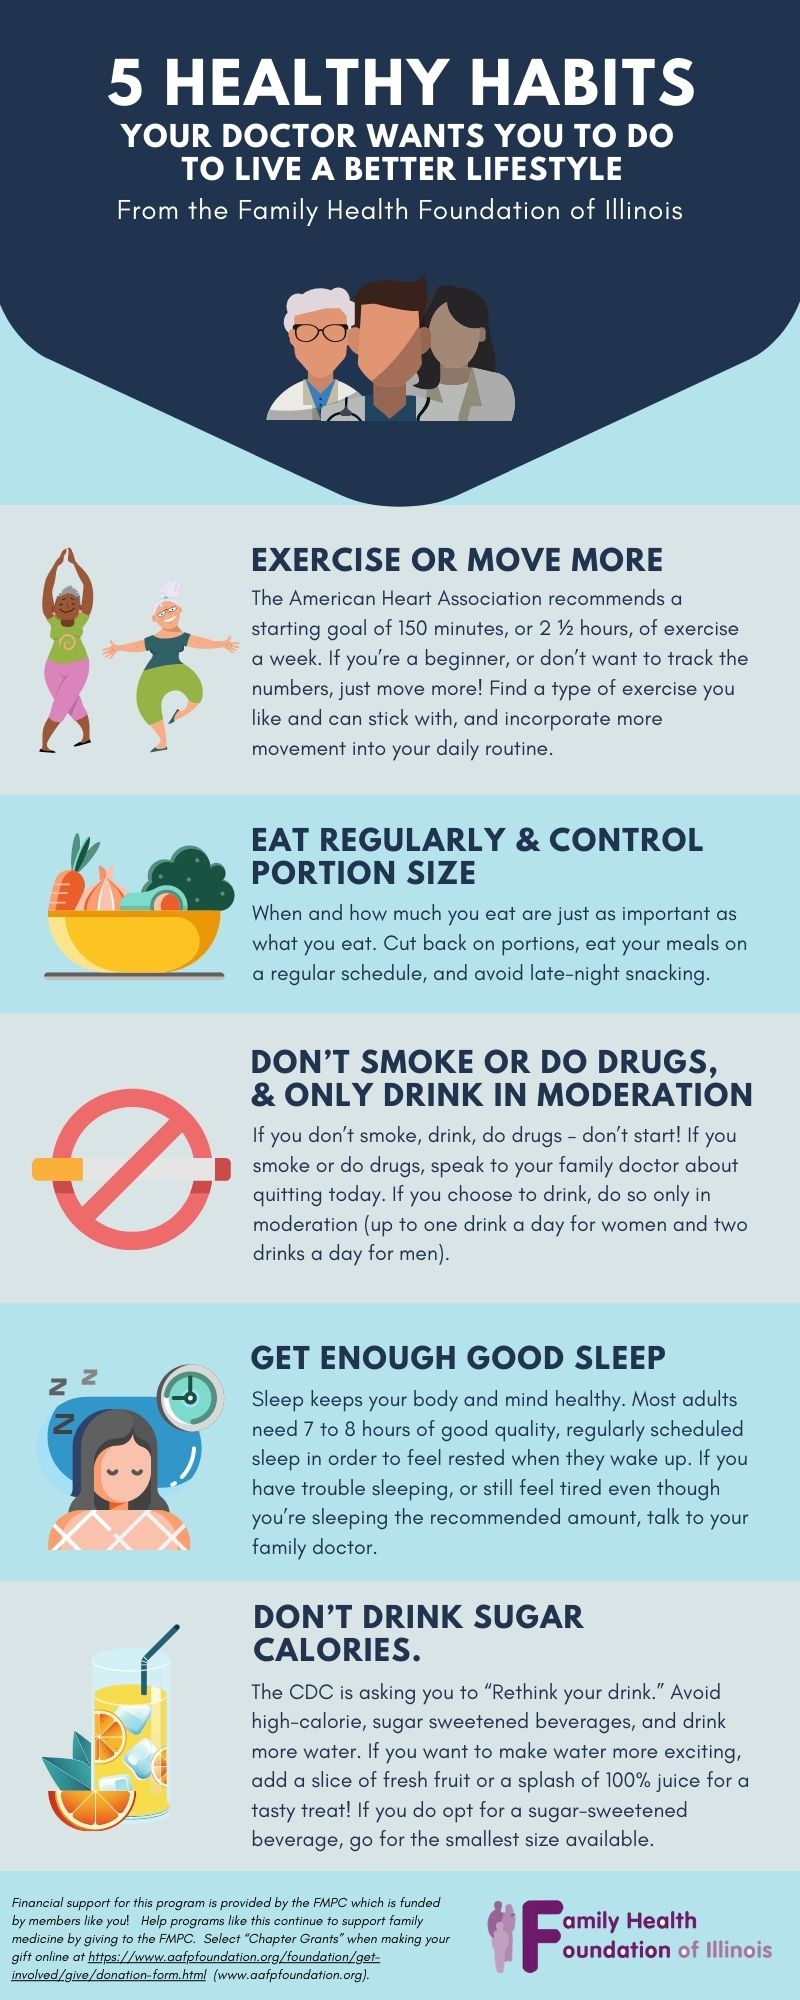 7 Ways to Improve Your Health and Live a More Active Life